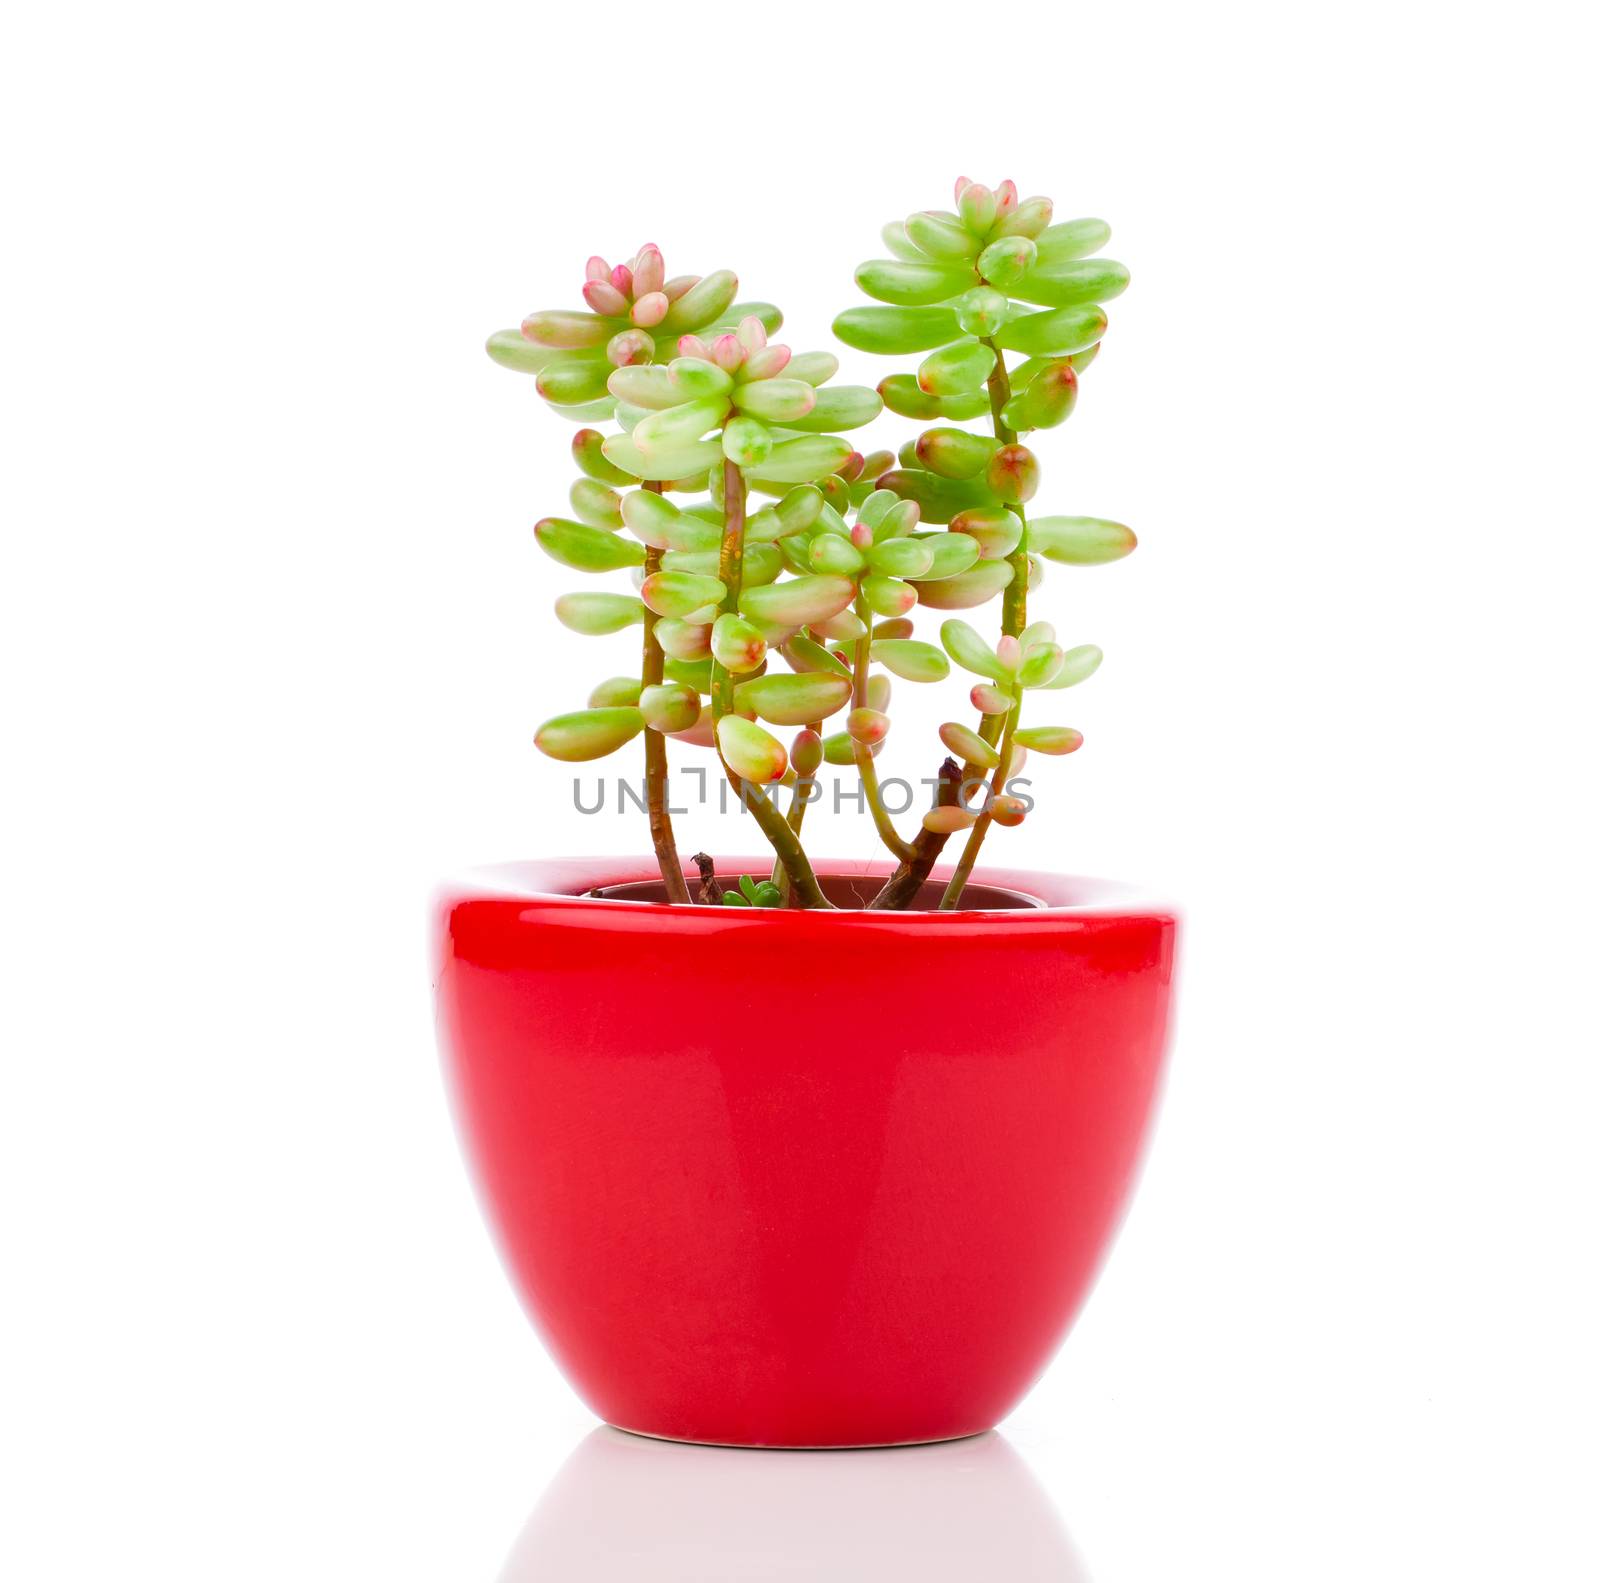 Adromischus houseplant in the red pot, on a white background. by motorolka